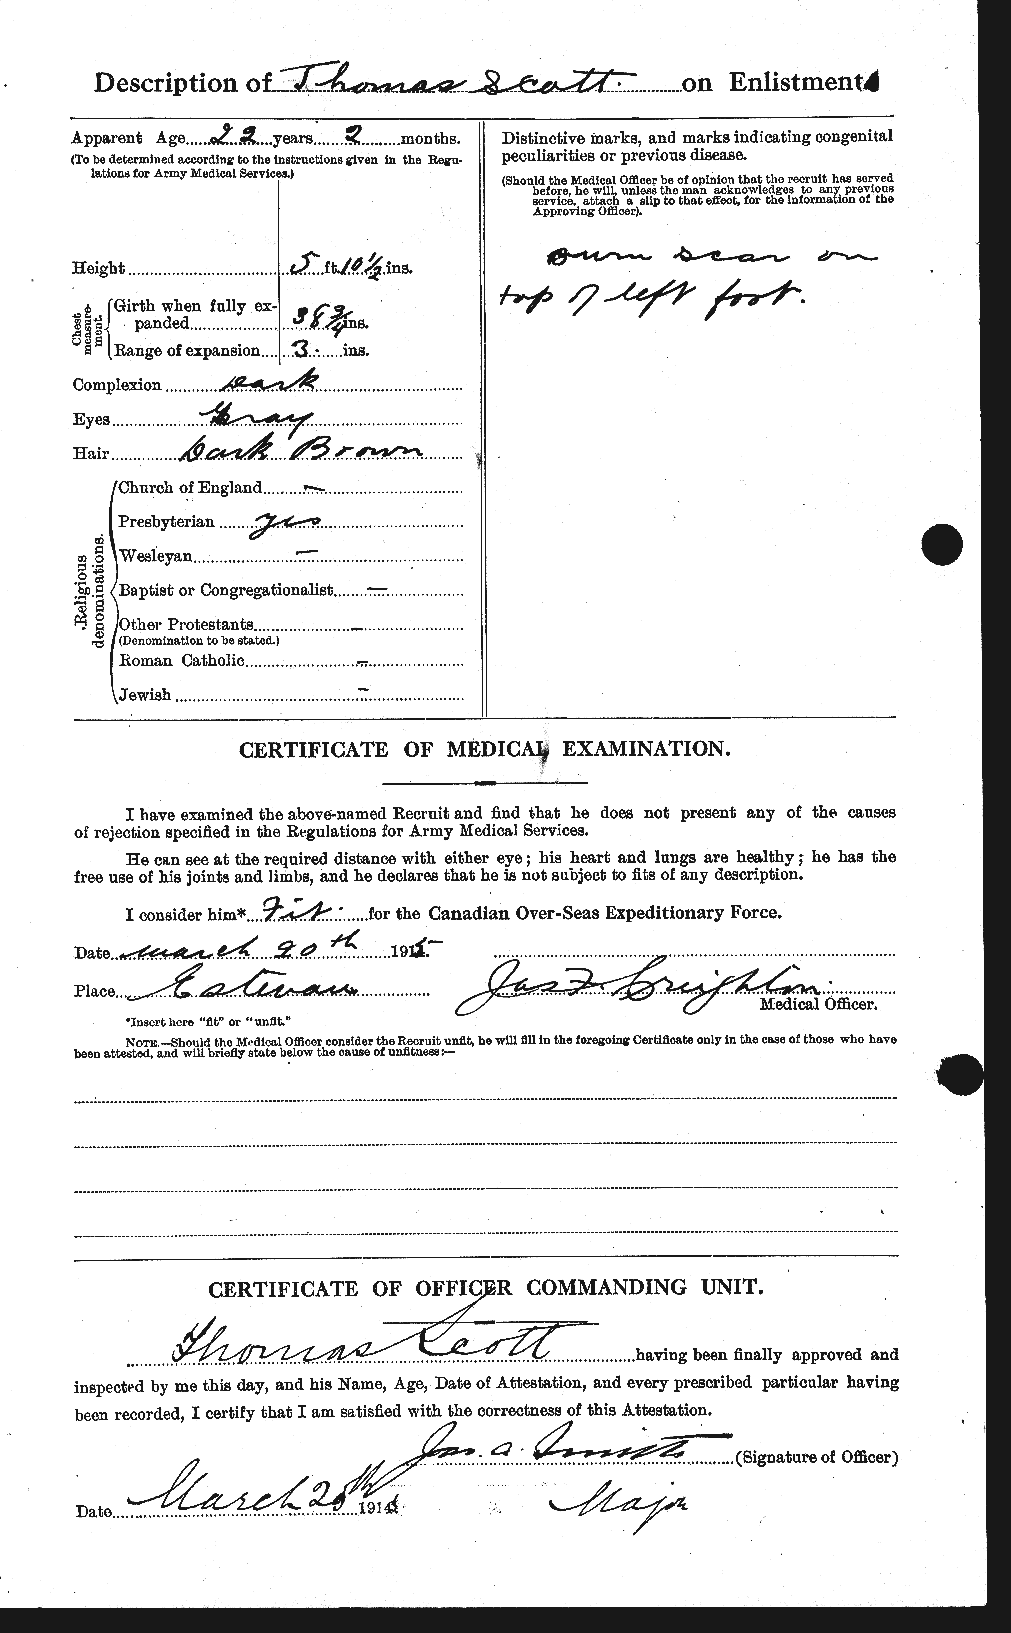 Personnel Records of the First World War - CEF 088545b